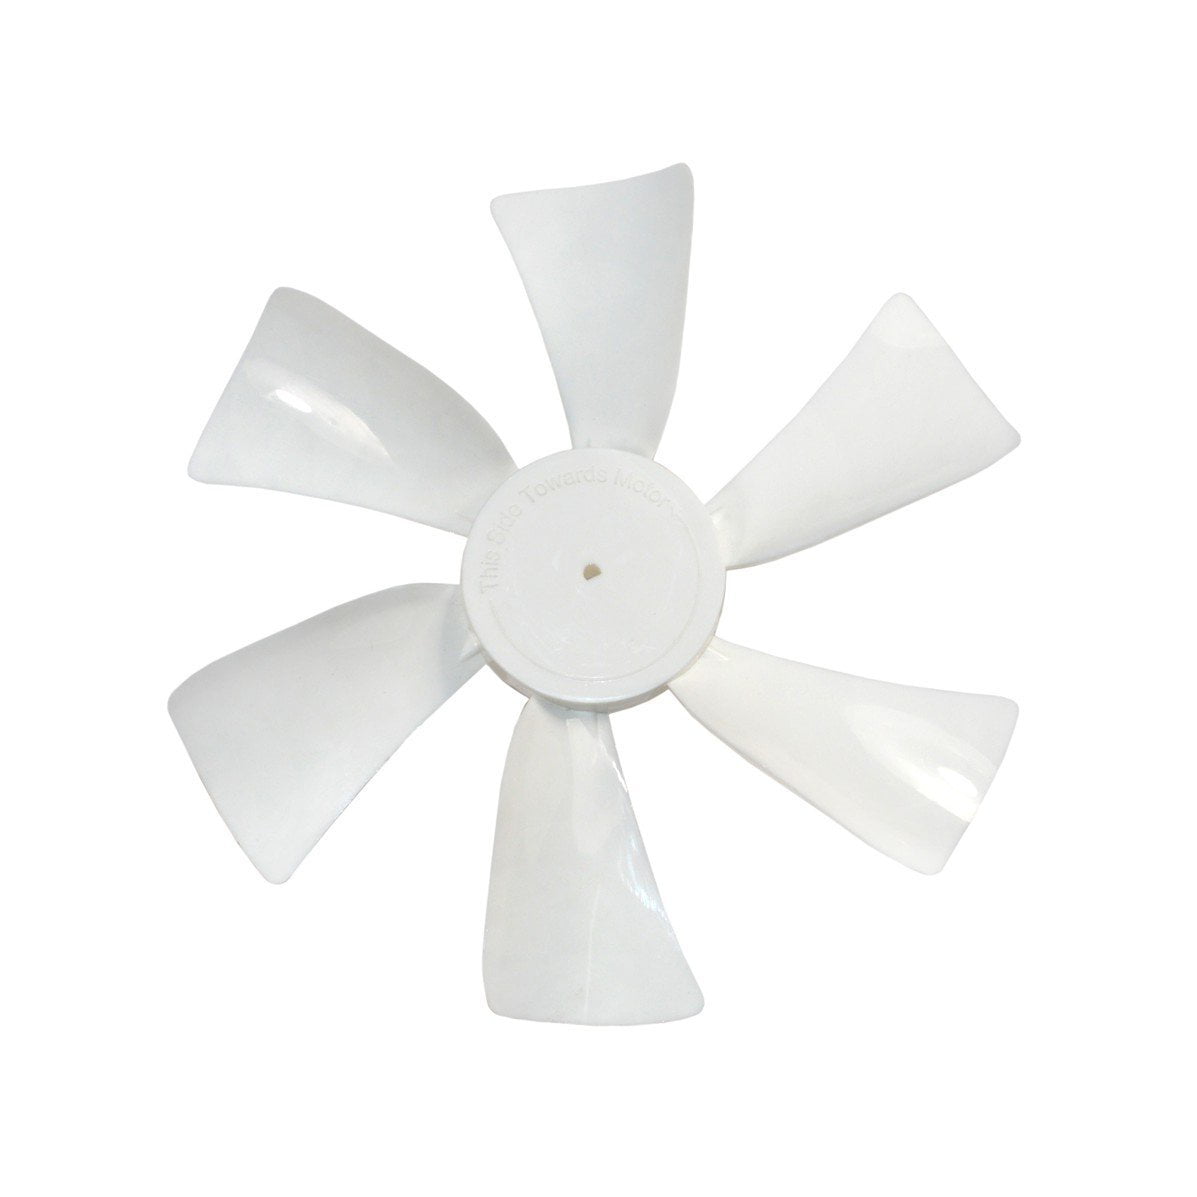 6 Replacement White RV Vent Fan Blade with 12V D-Shaft RV Vent  Motor,Compatible with Heng's, Elixir, Ventline, Jensen RV